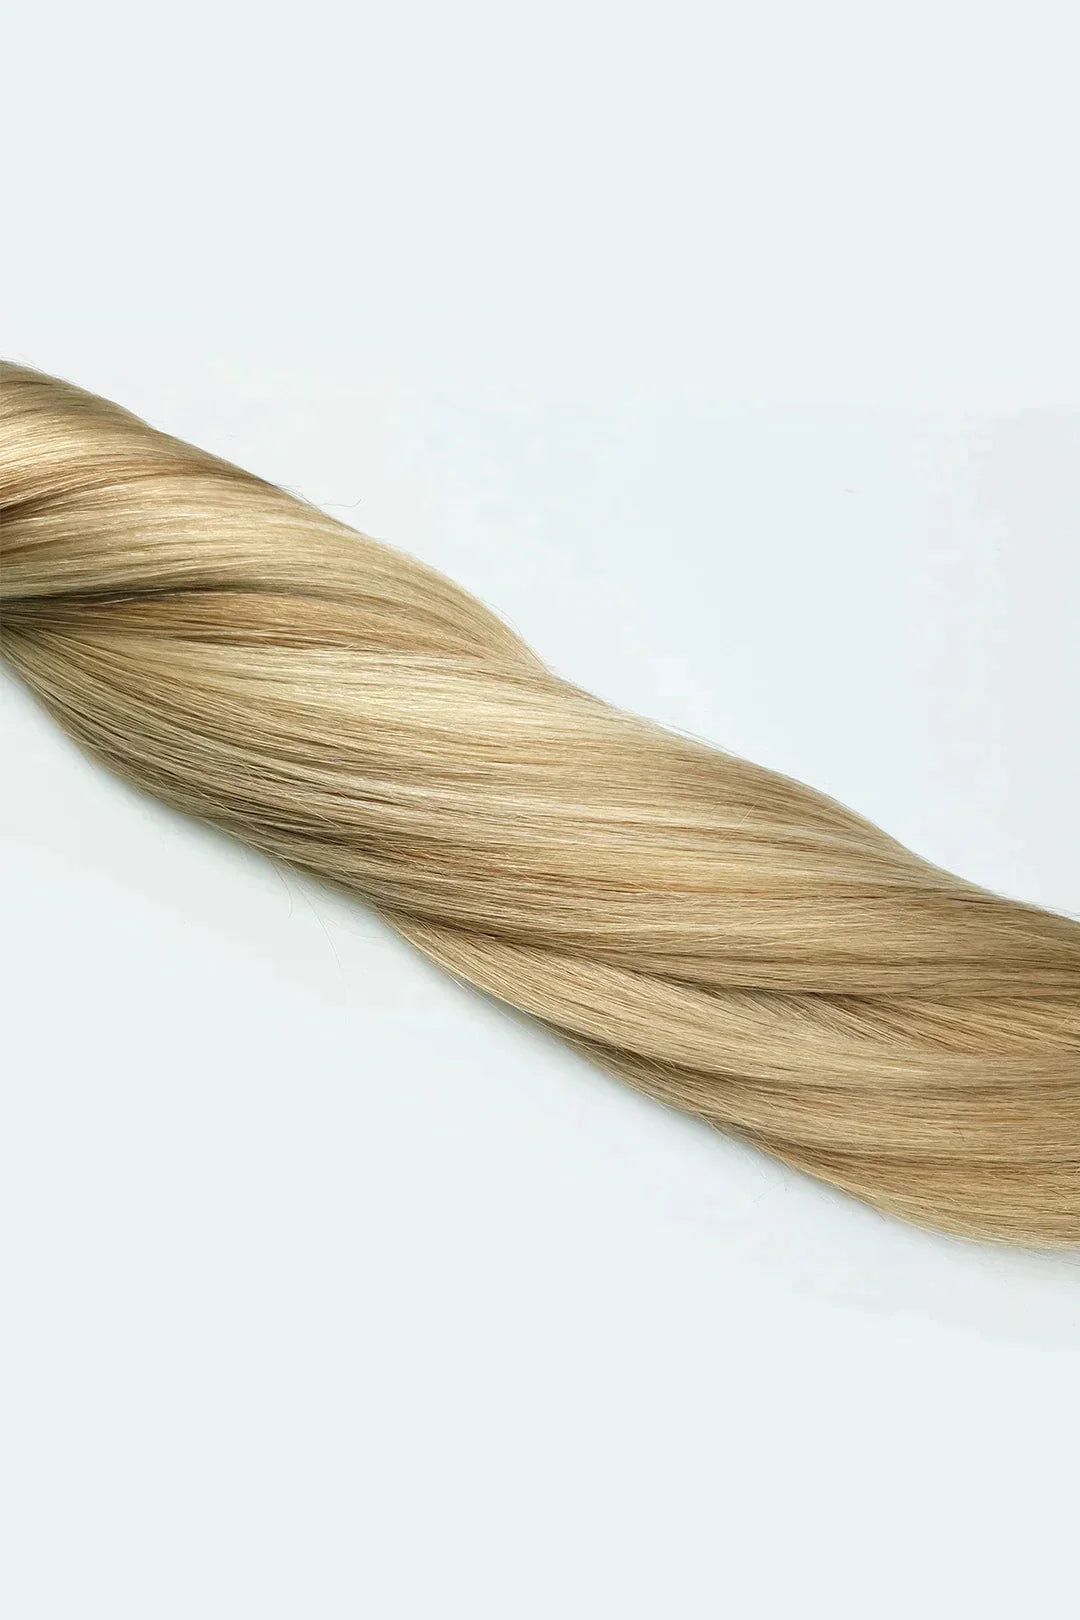 Clip in hairextensions met blonde highlights.